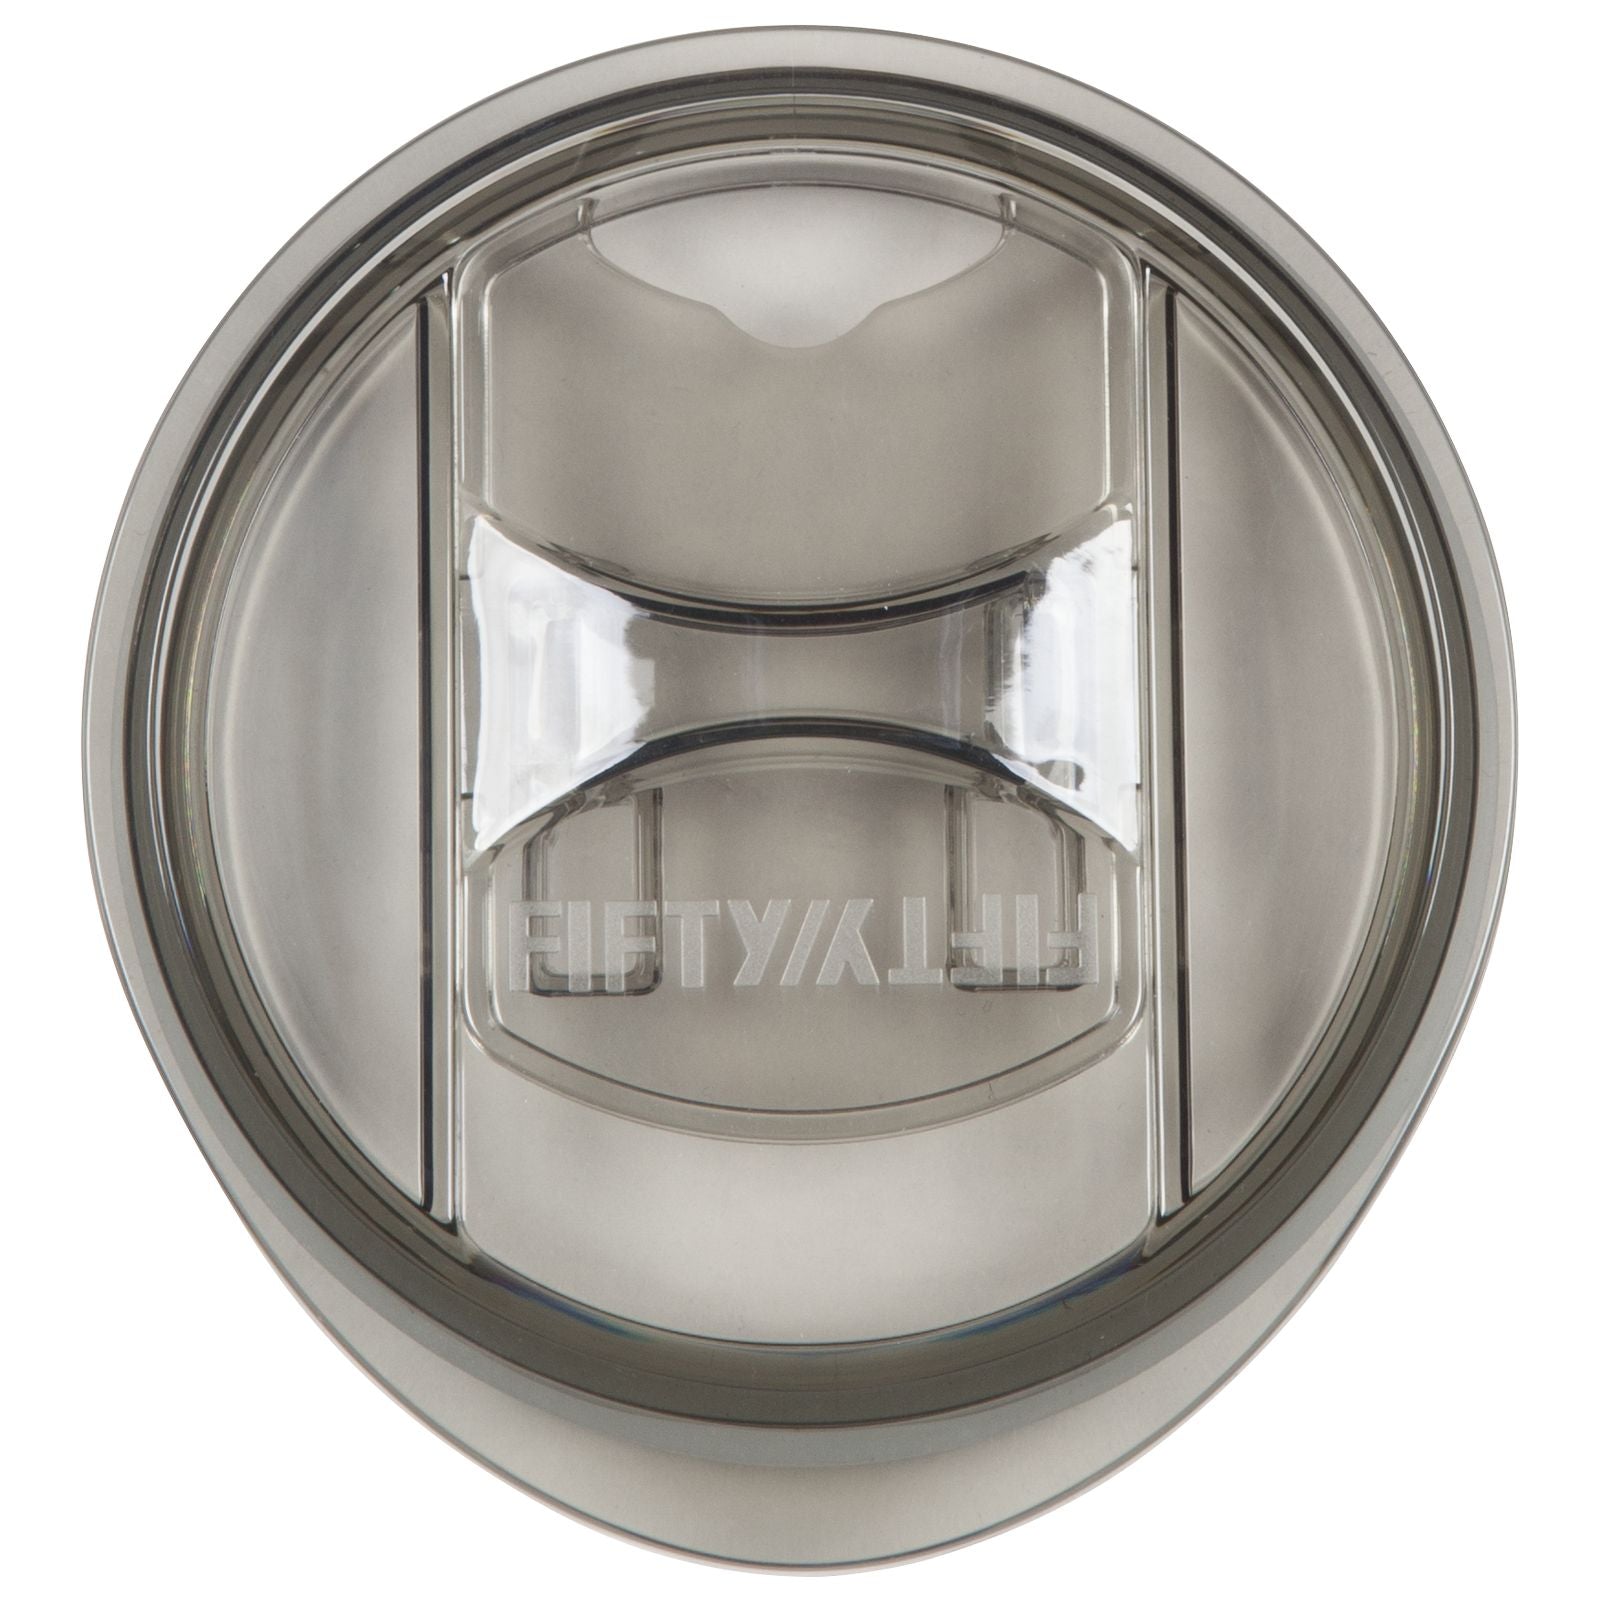 2 Replacement Lids for 30oz Stainless Steel Tumbler Travel Cup